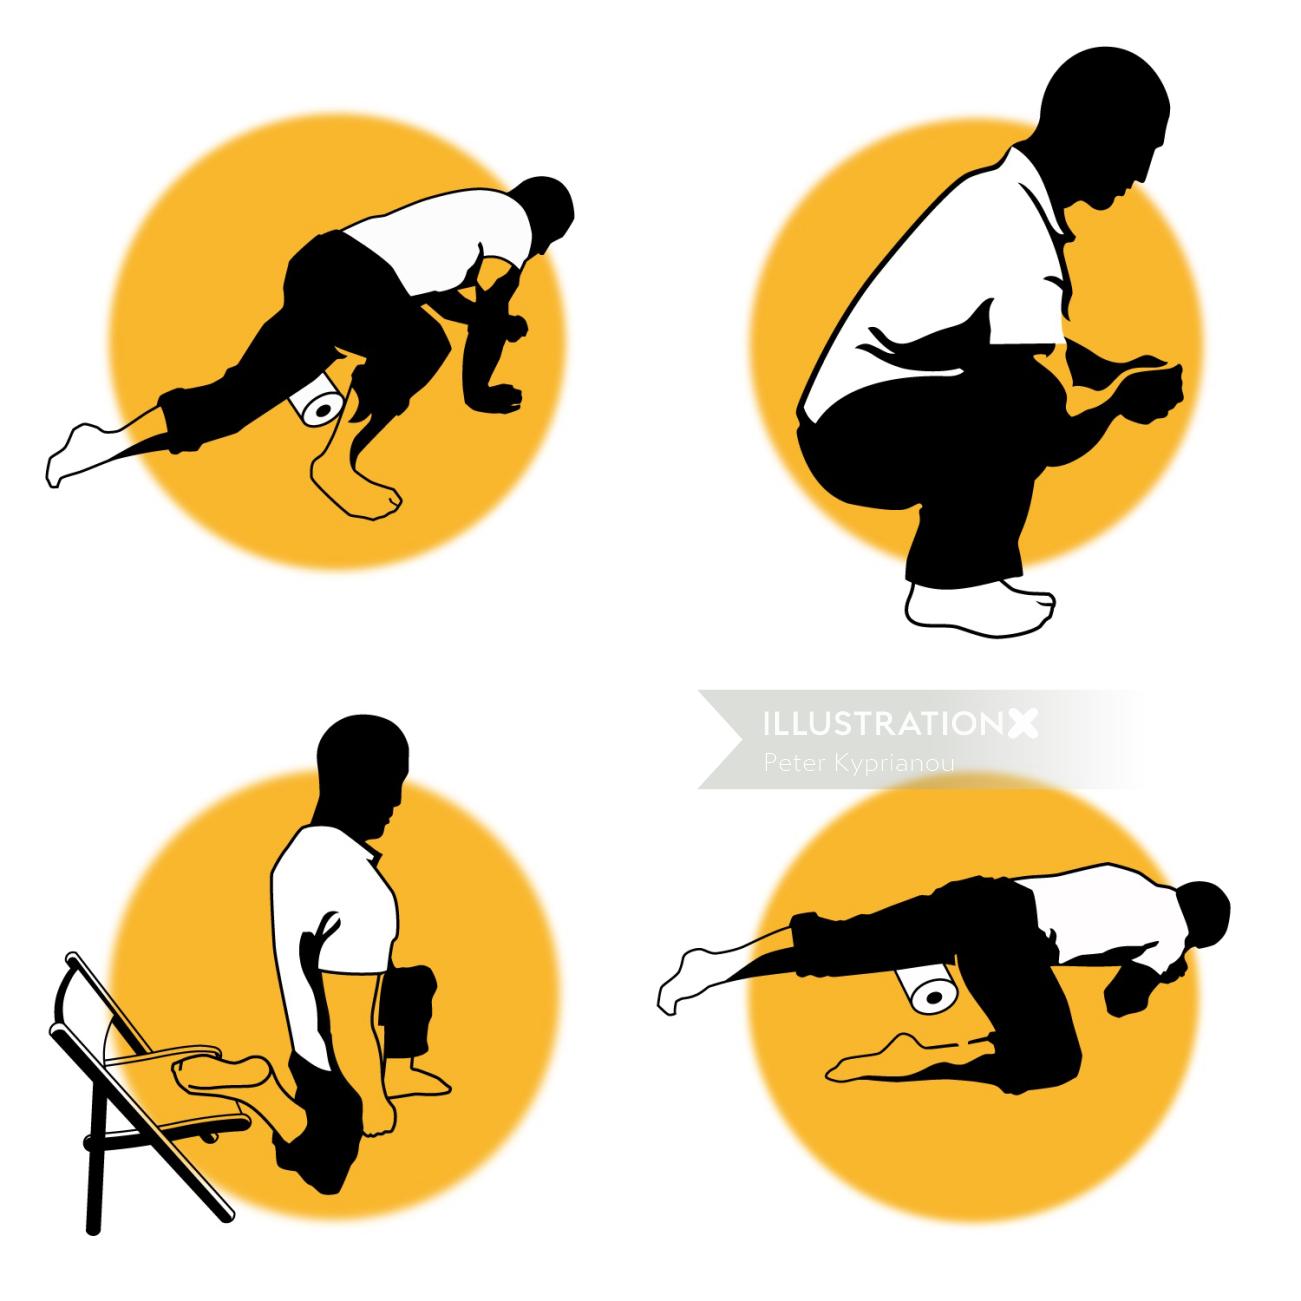 Infographic of a man doing fitness exercises
